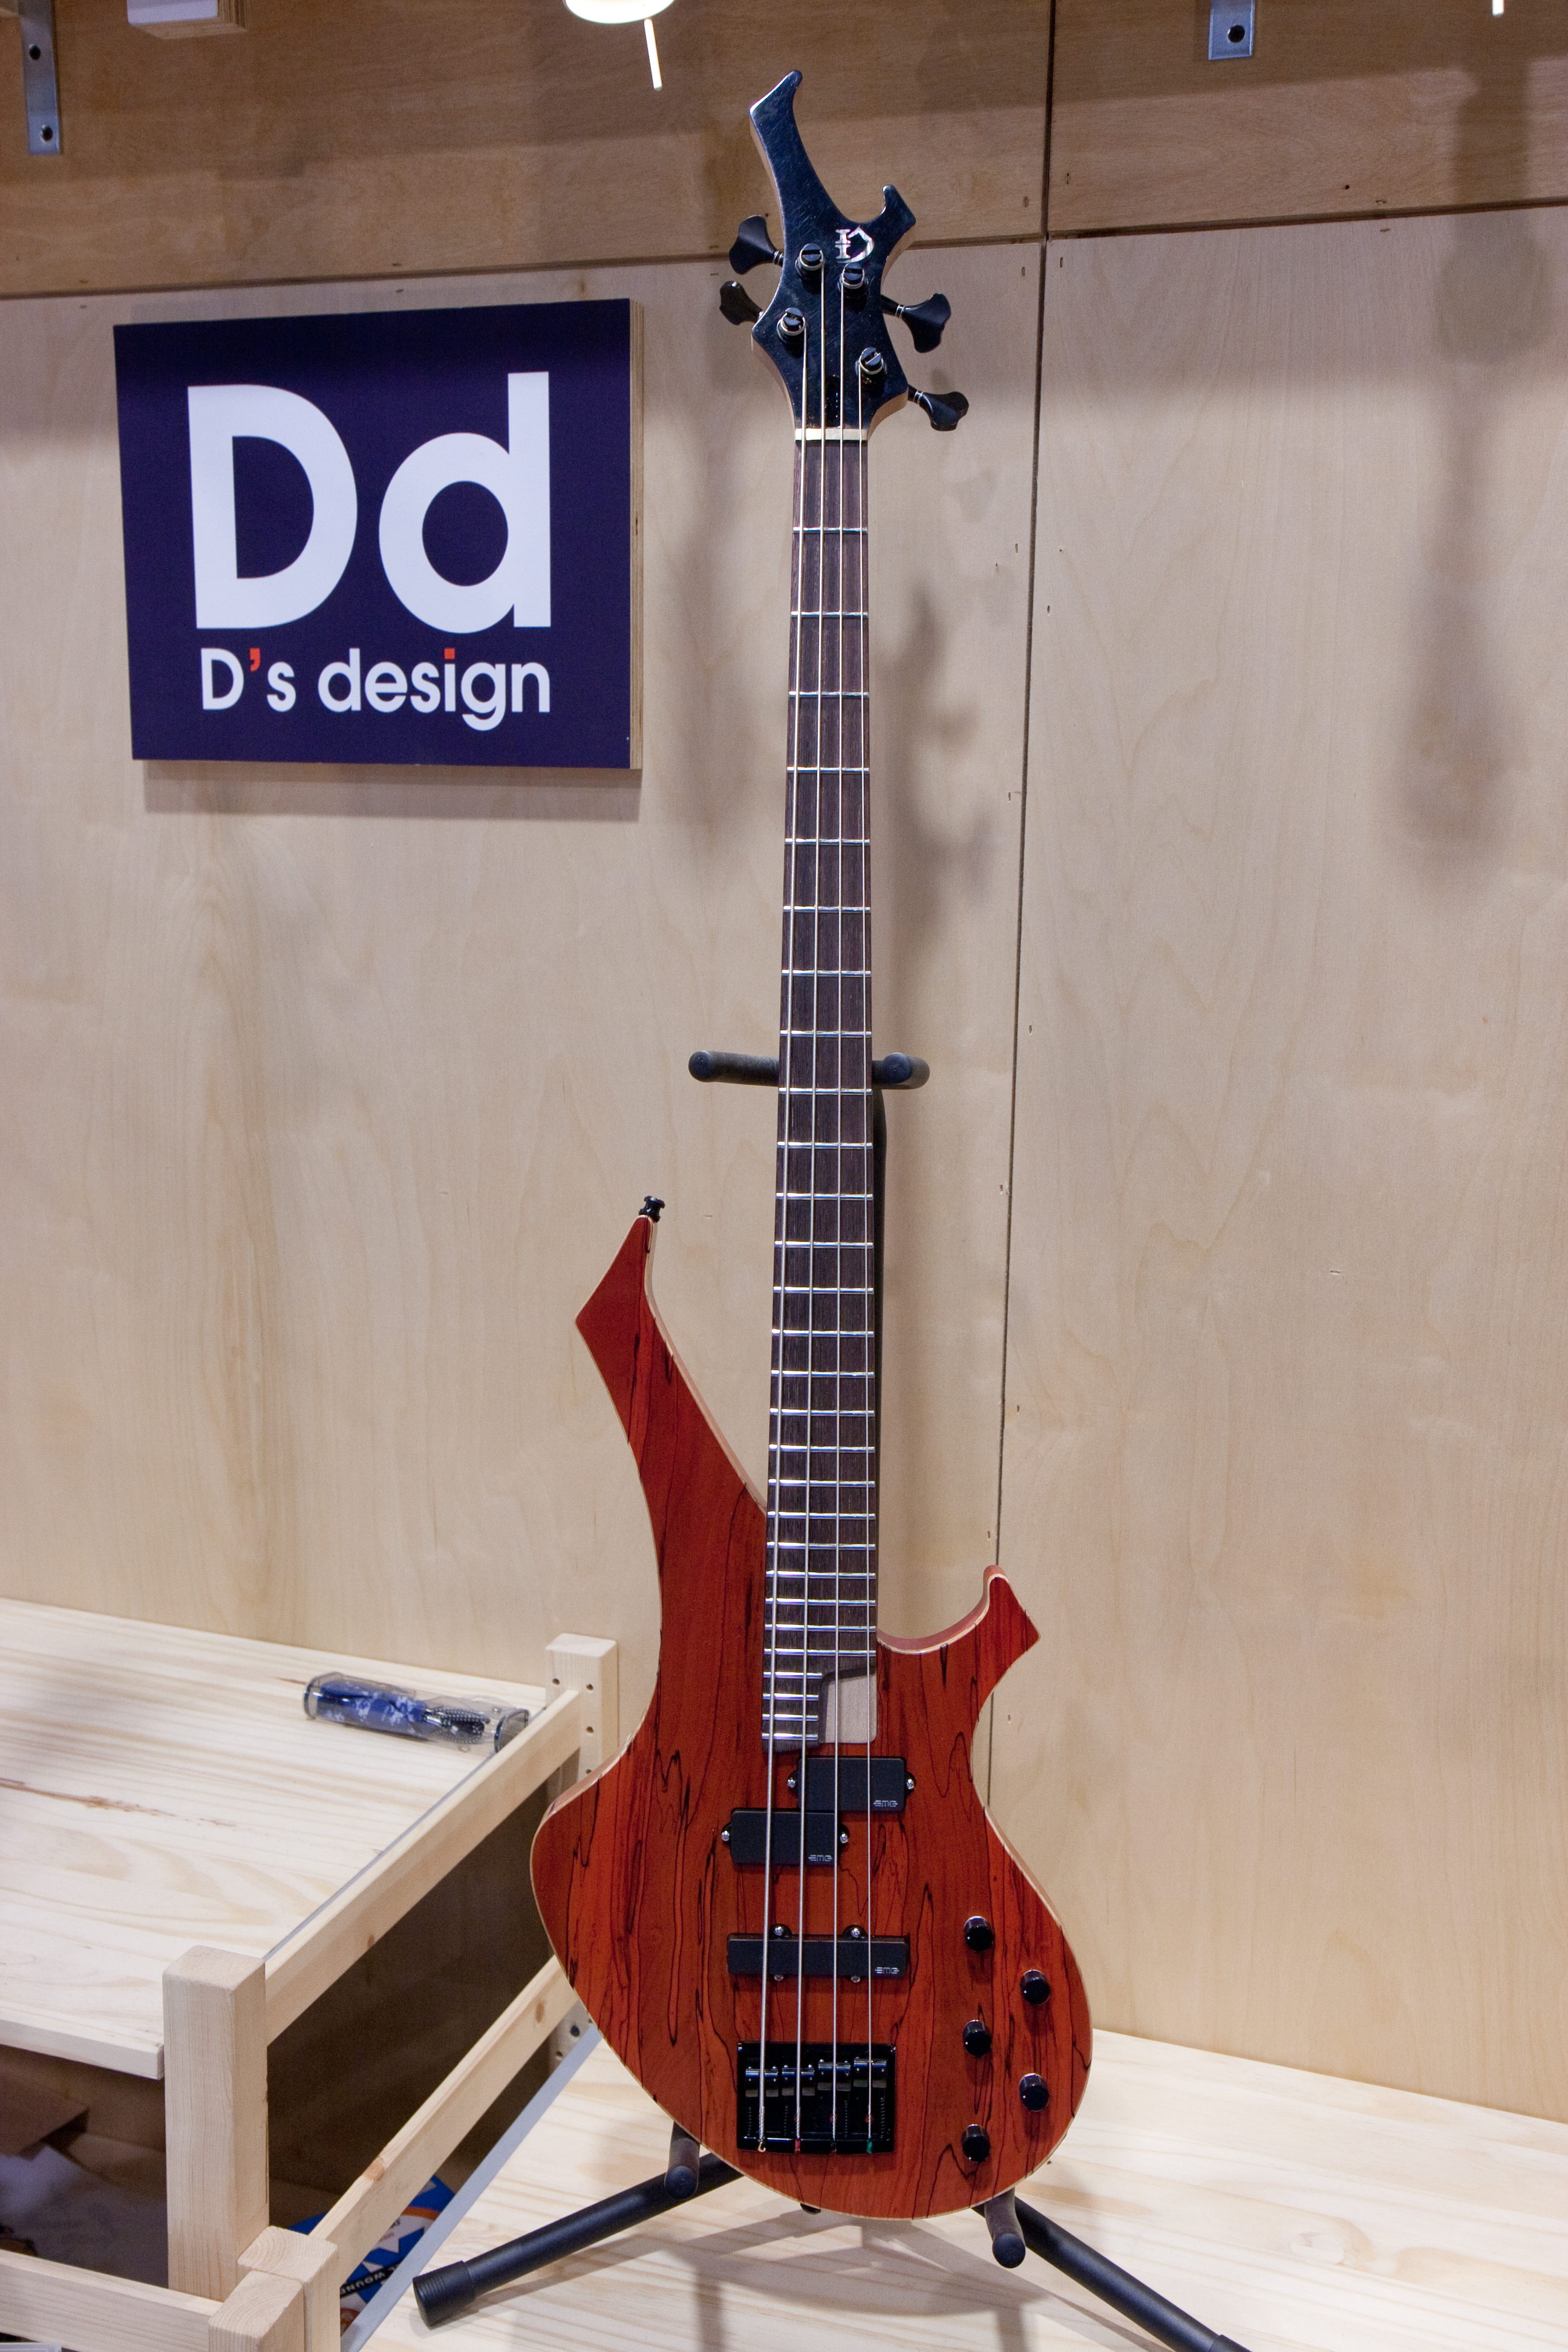 D’s design DB-1 "Insect Bass"